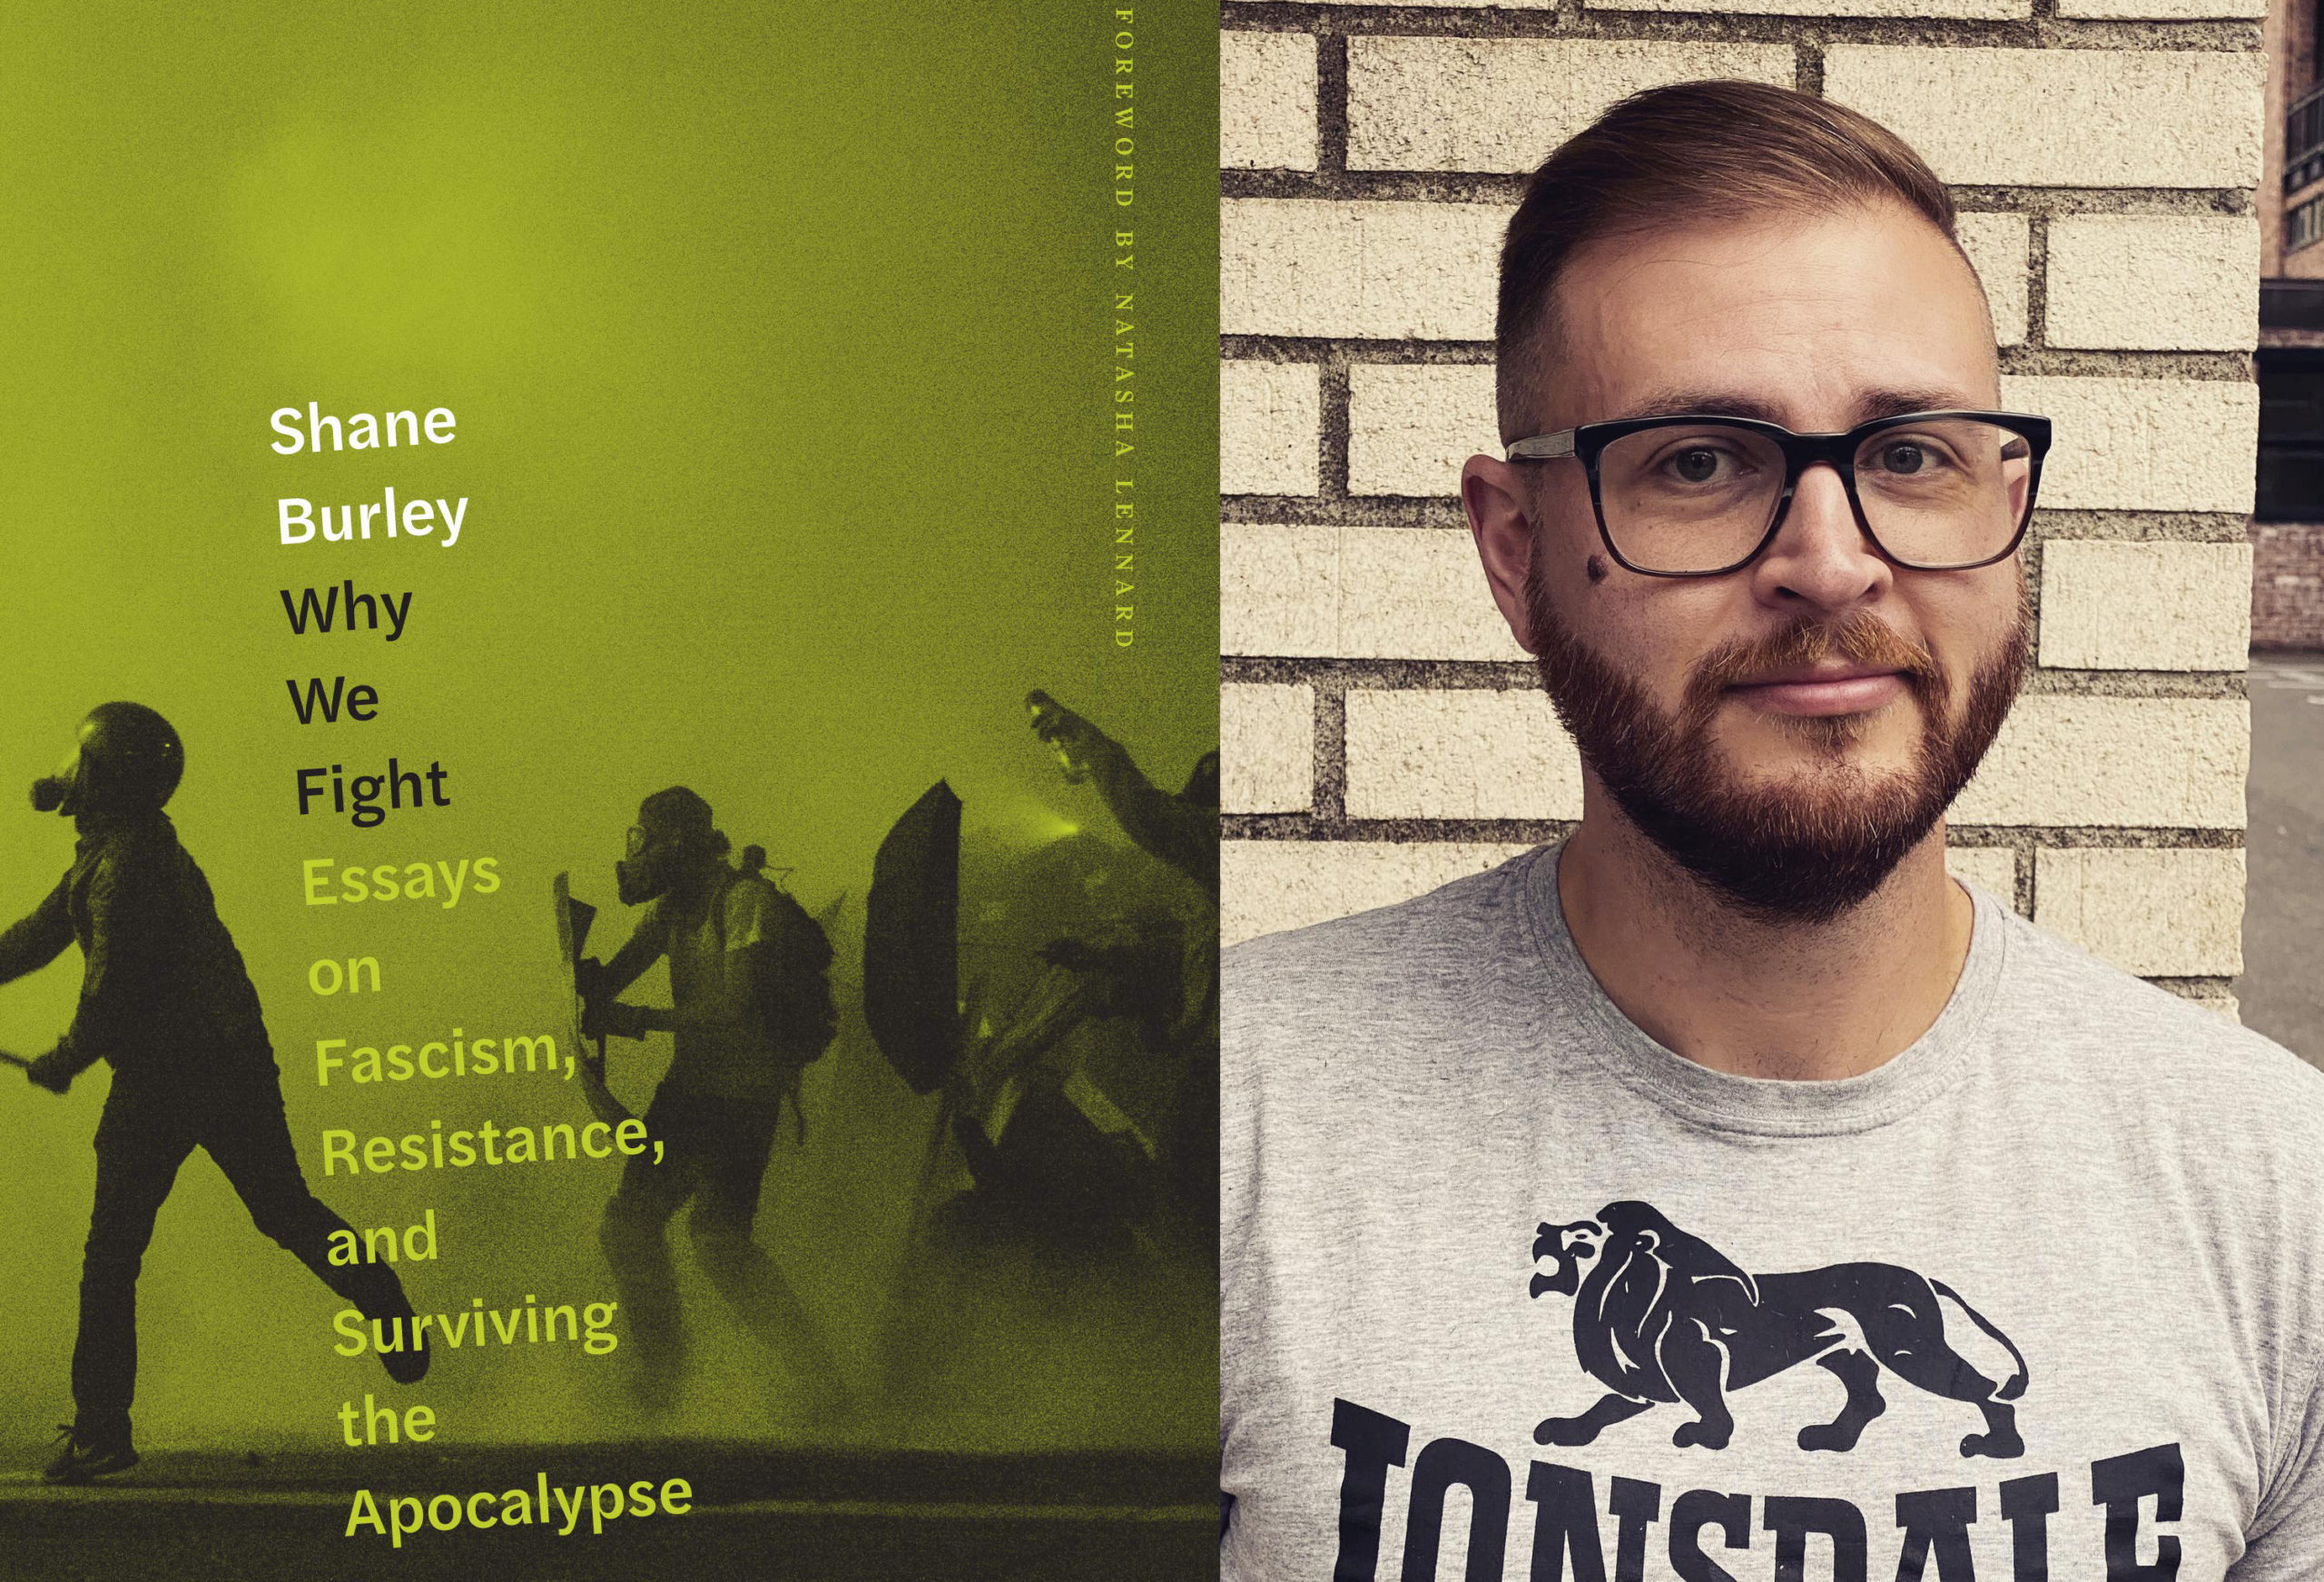 Shane Burley Talks About Antiracism, Antifascism, Antisemitism, and Reasons for Hope